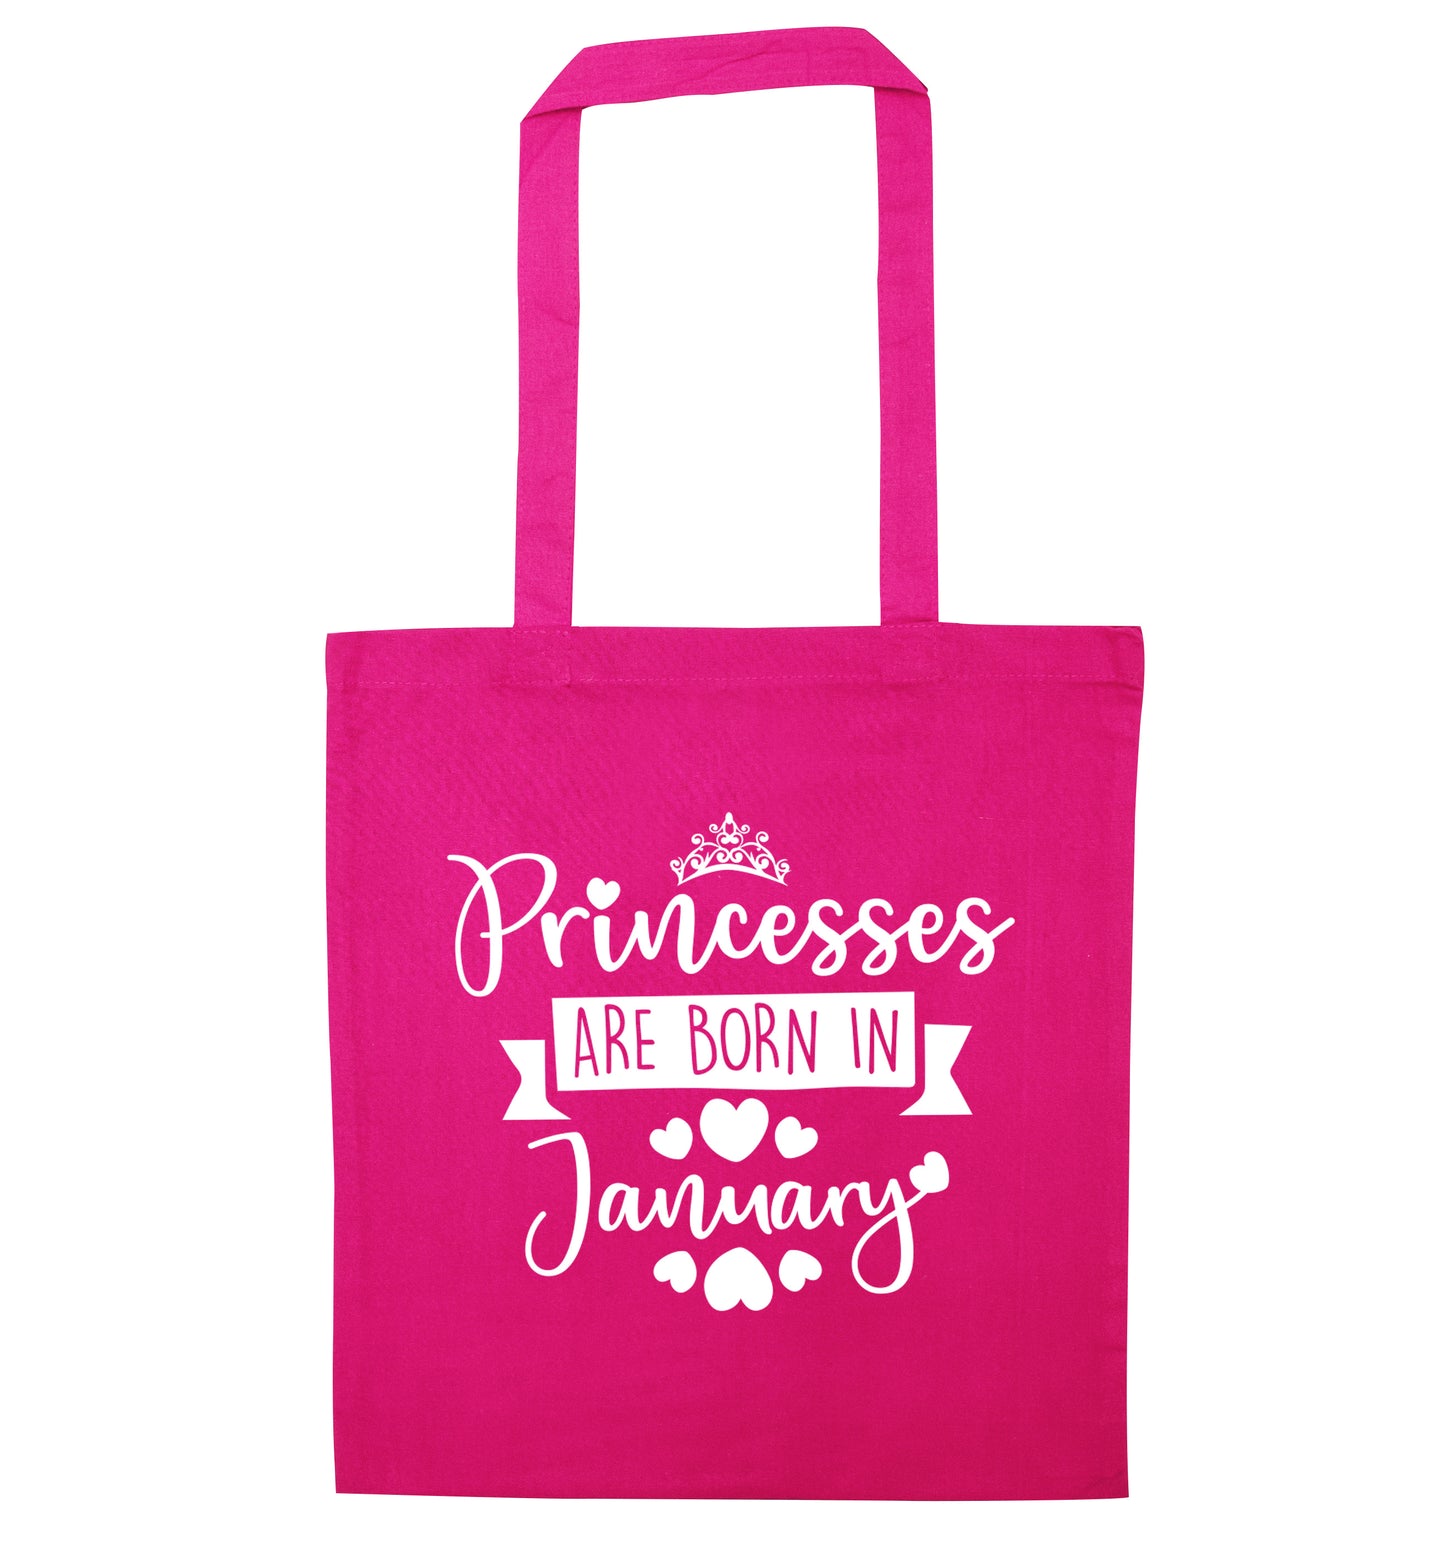 Princesses are born in January pink tote bag